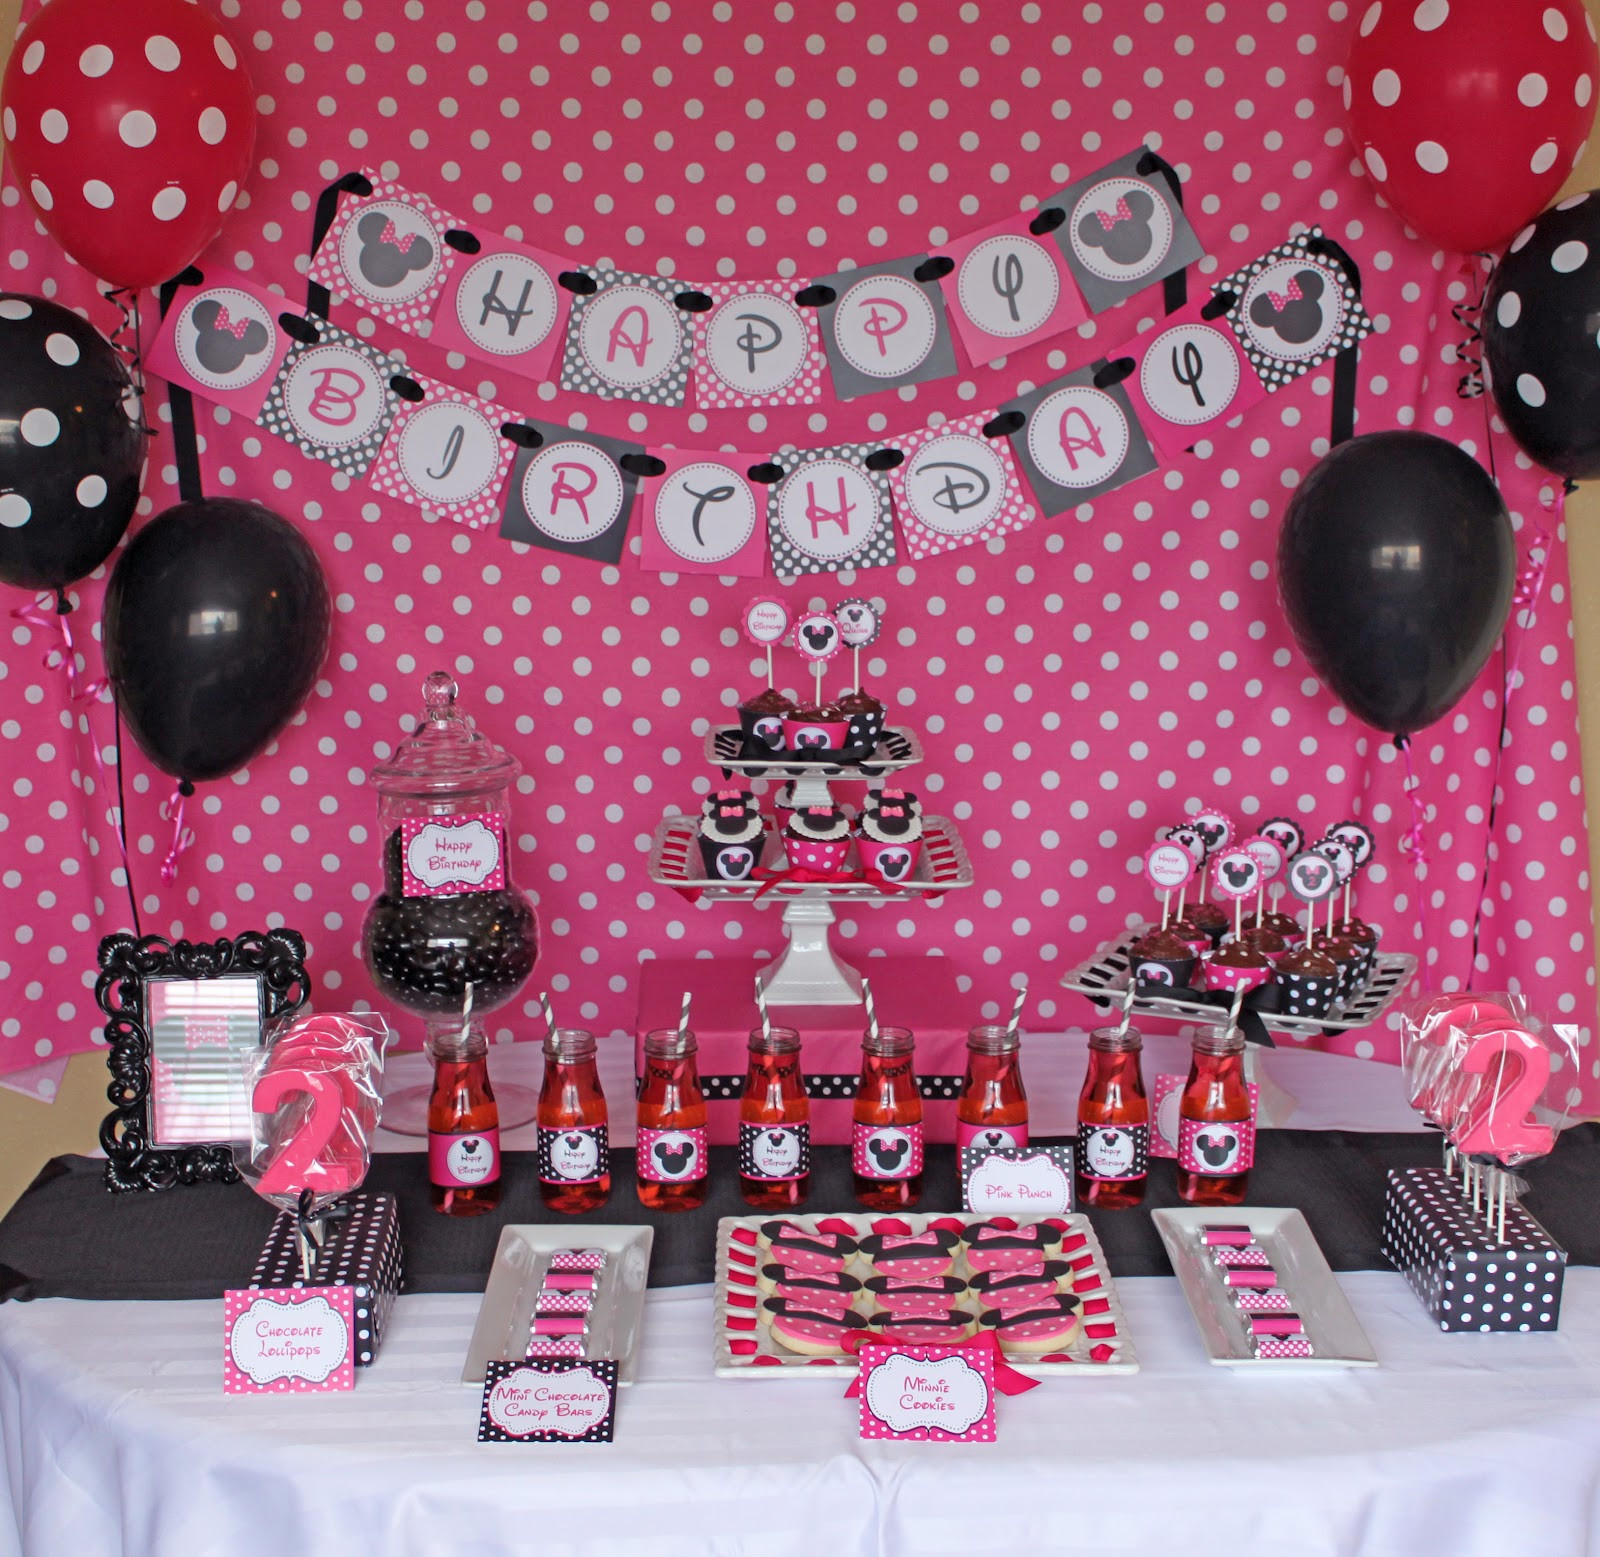 Minnie Mouse Birthday Party Decorations
 Cupcake Express Minnie Mouse Birthday Party